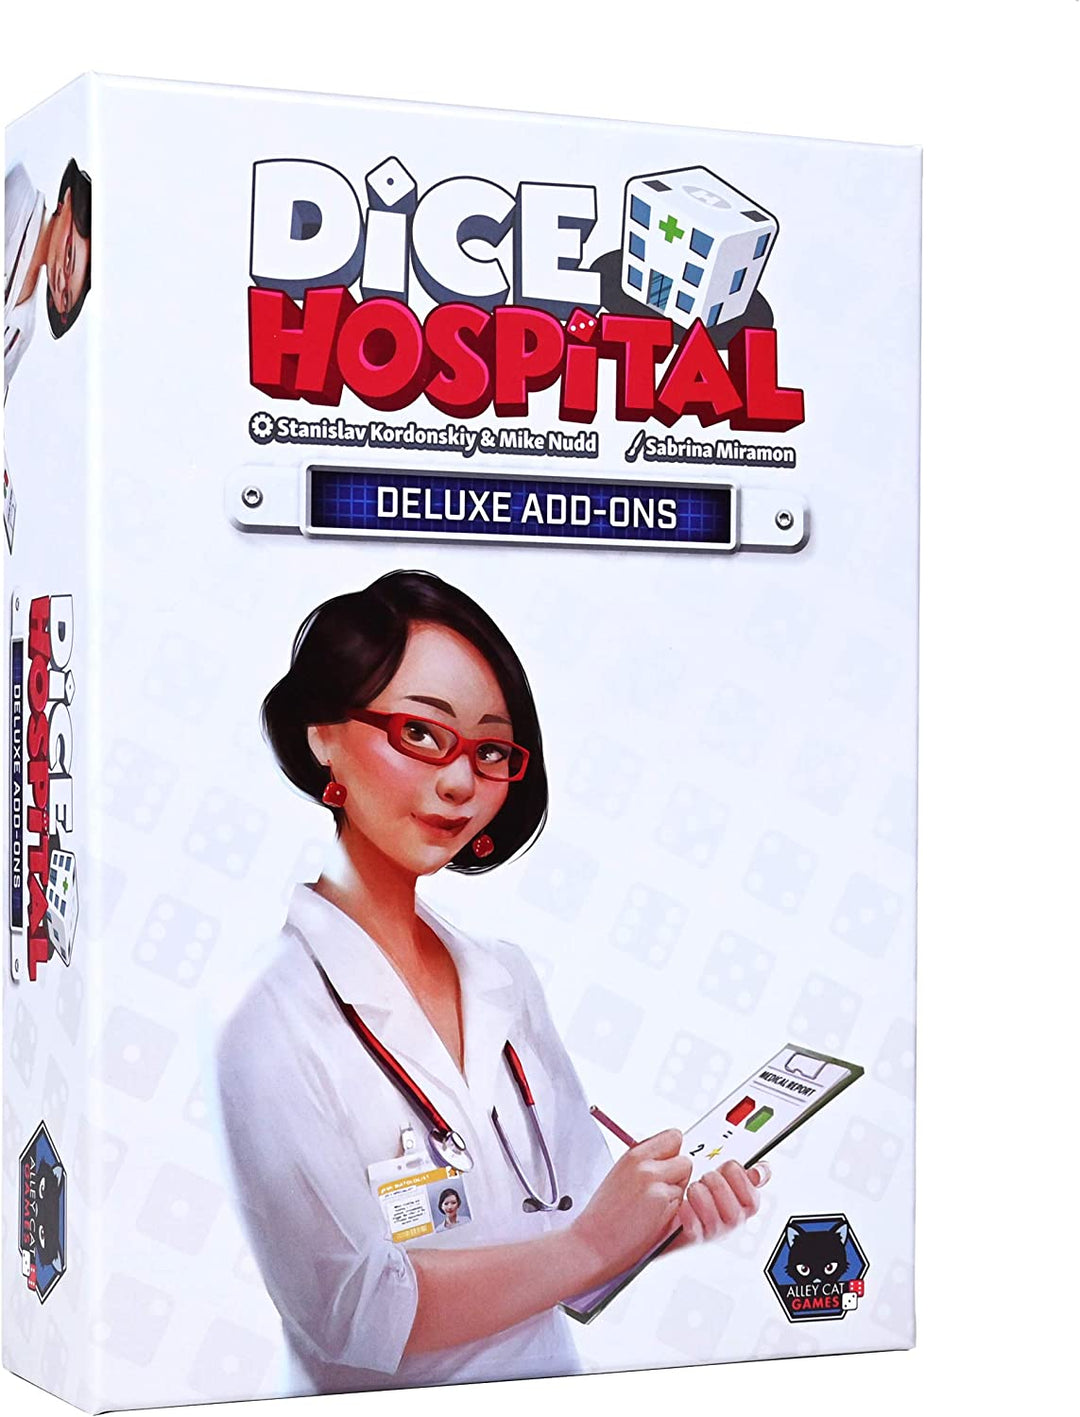 Dice Hospital: Deluxe-Add-Ons